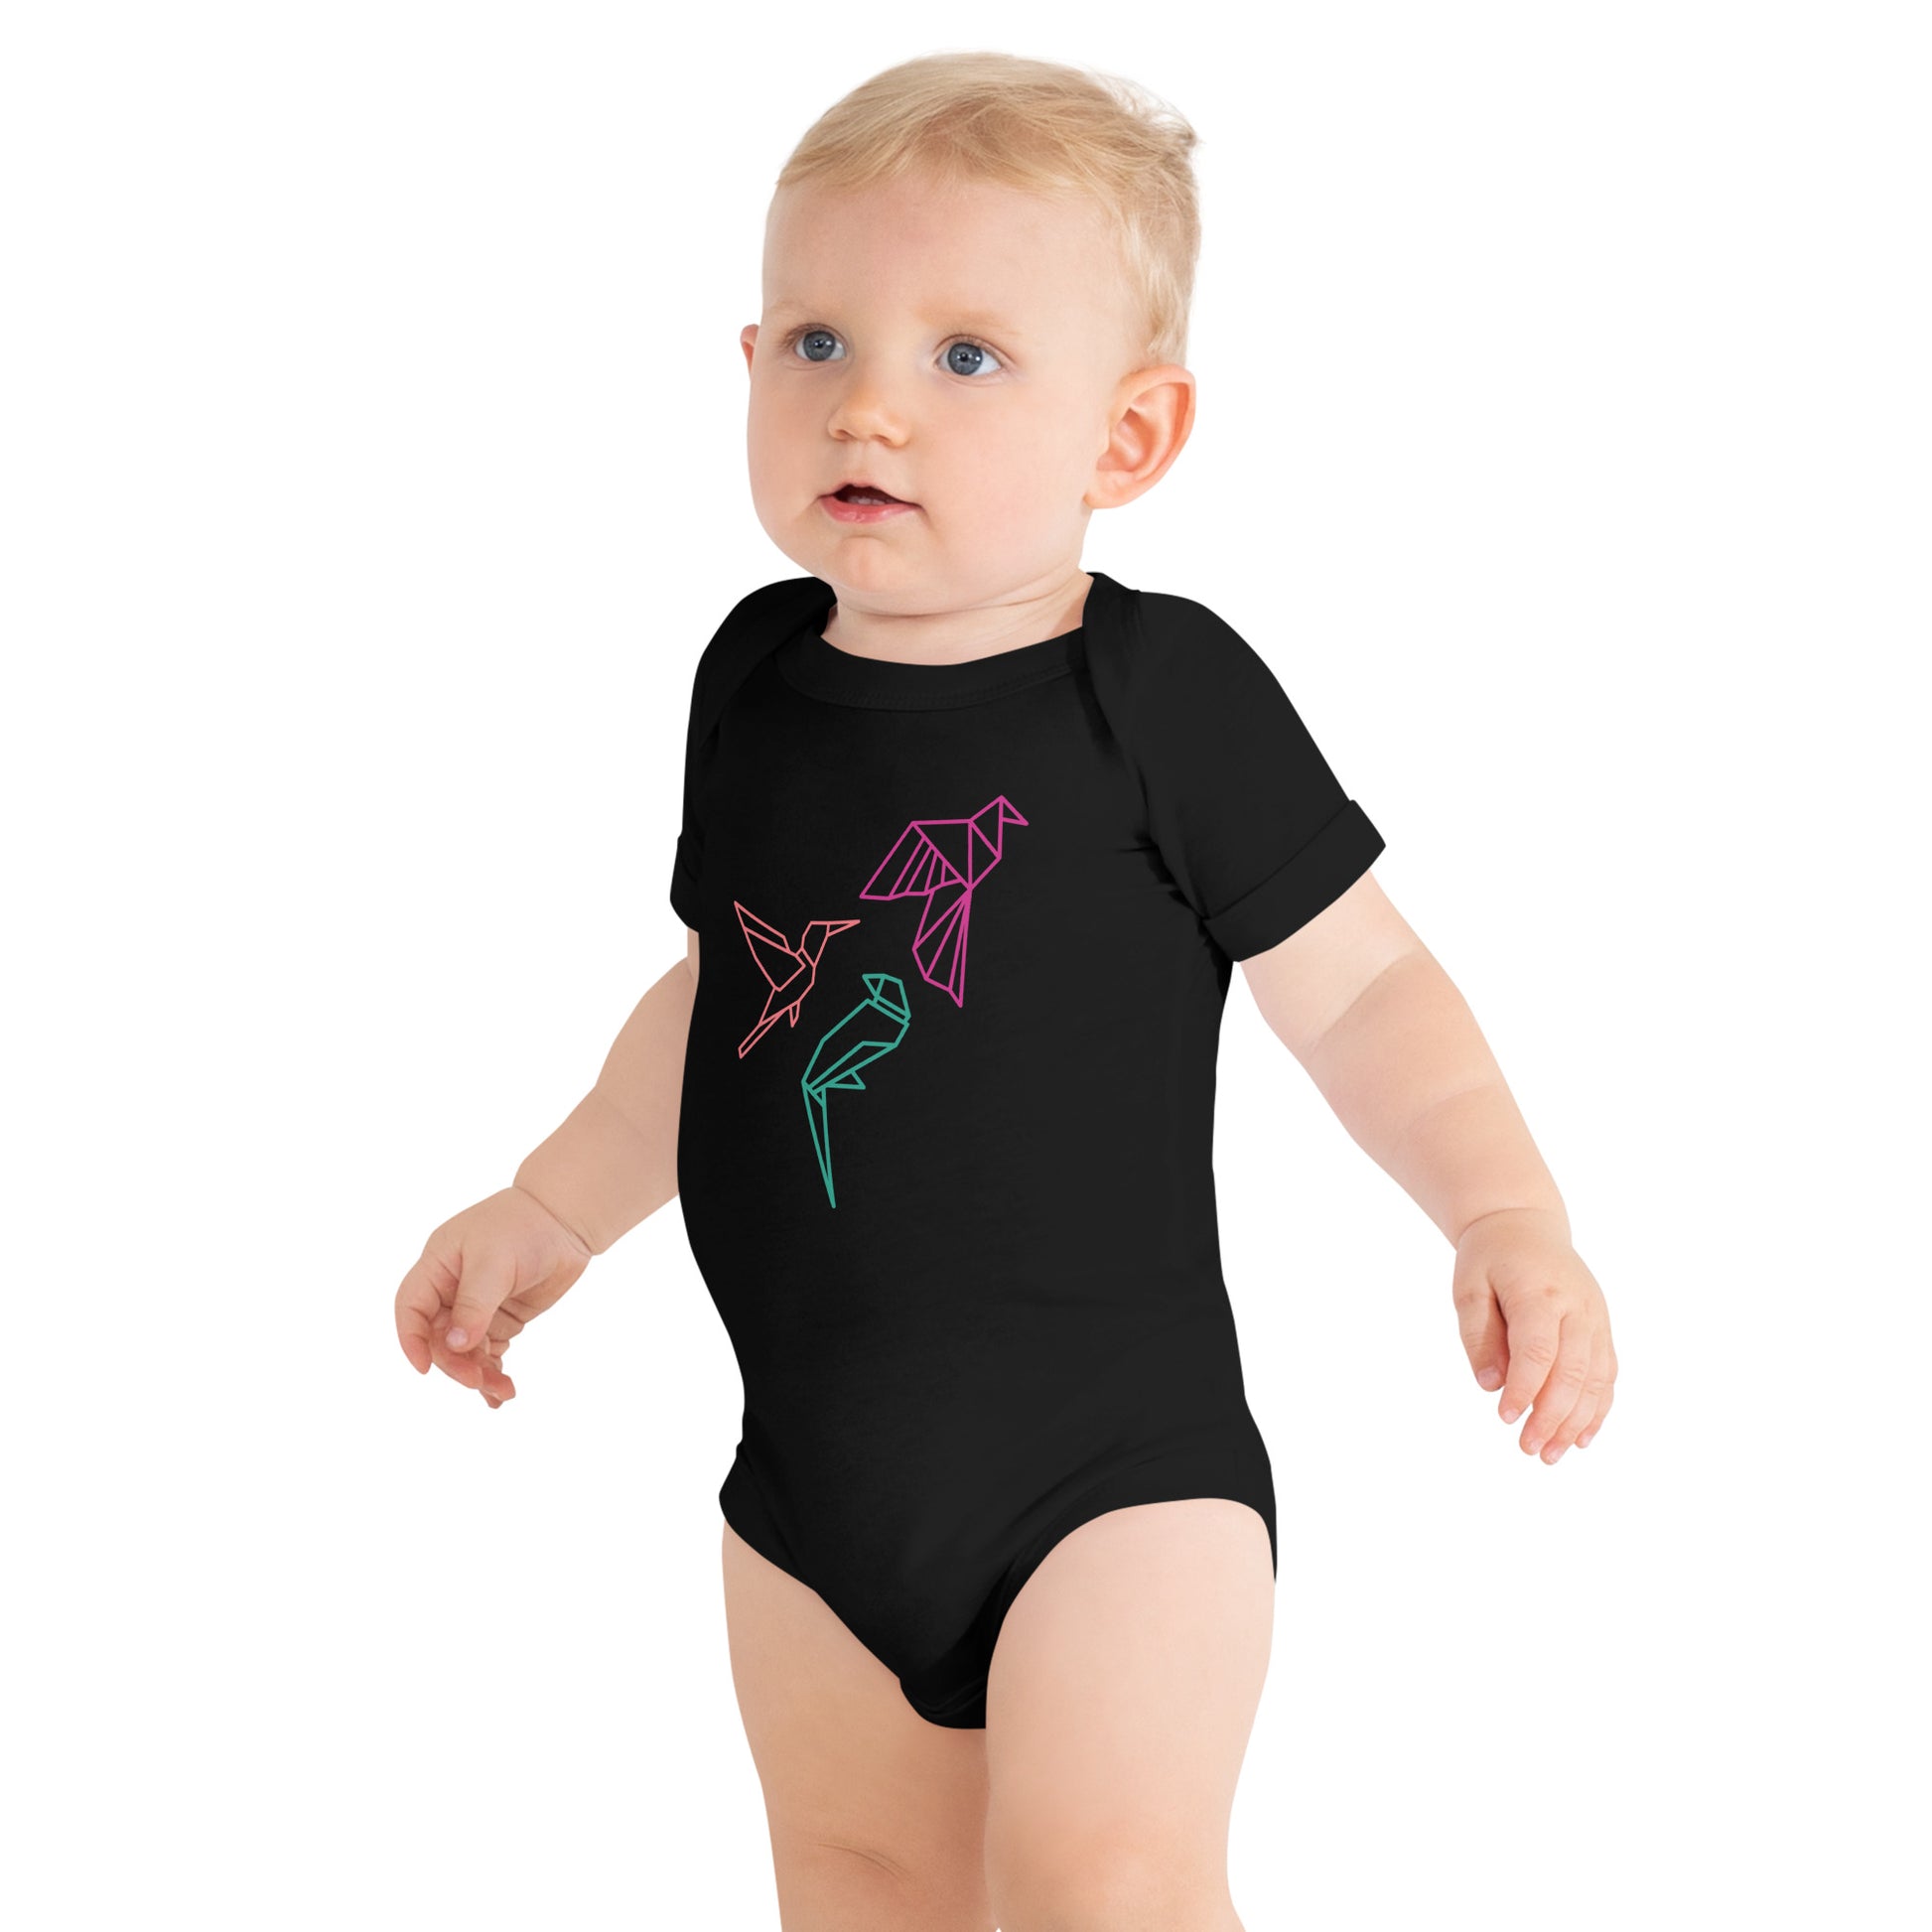 Baby with a black short sleeve one piece with three birds in Orange, Green and Pink